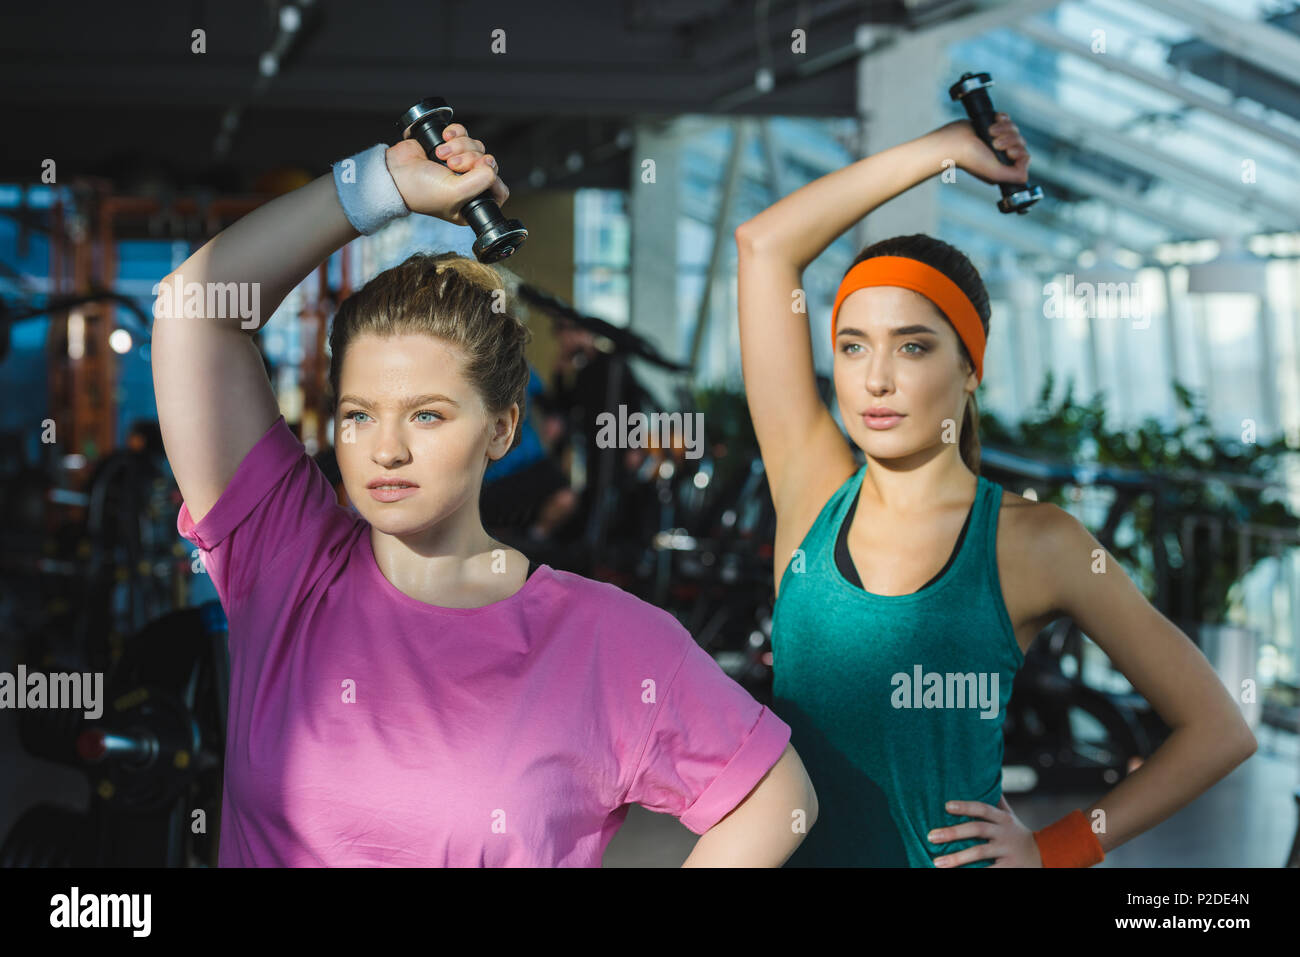 Sporty and overweight women training with dumbbells at gym Stock Photo